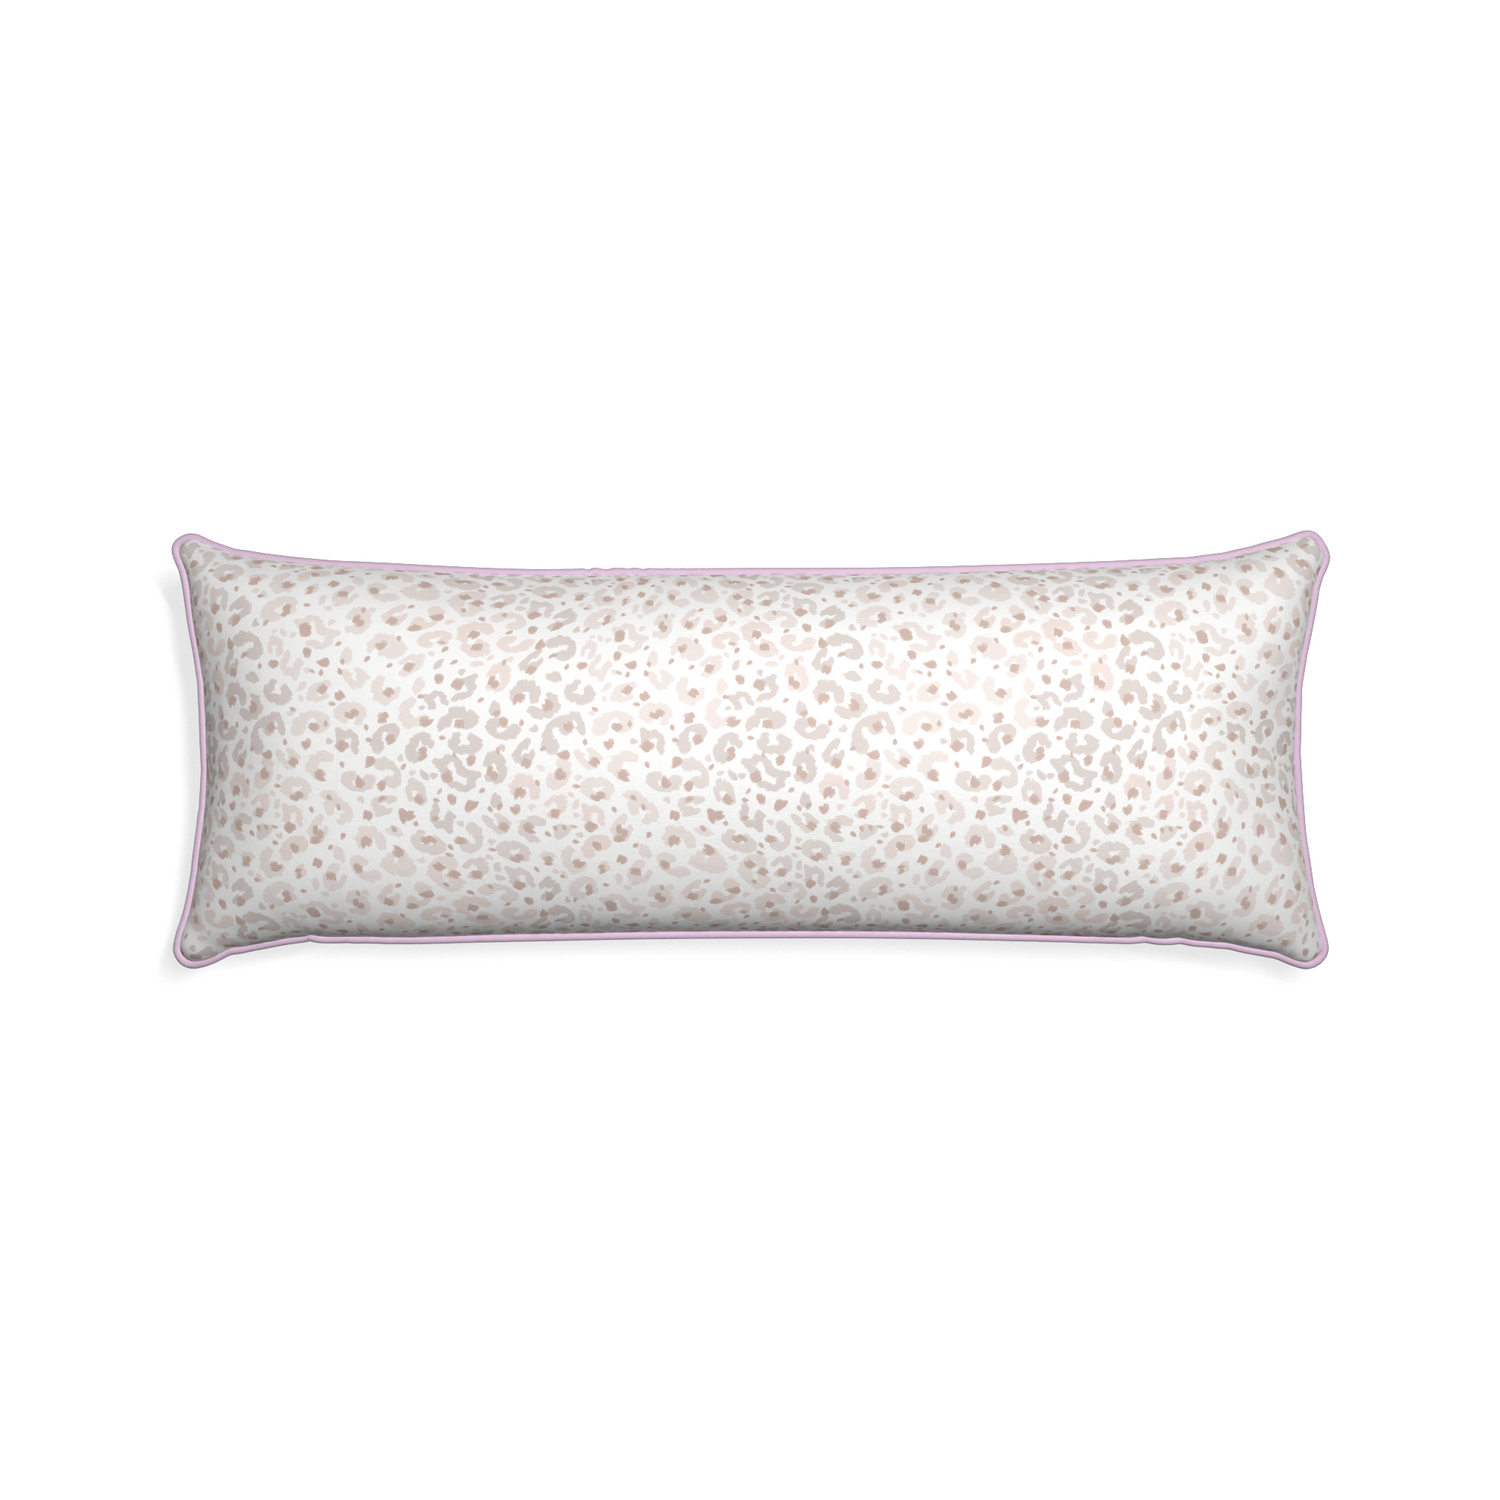 Xl-lumbar rosie custom beige animal printpillow with l piping on white background